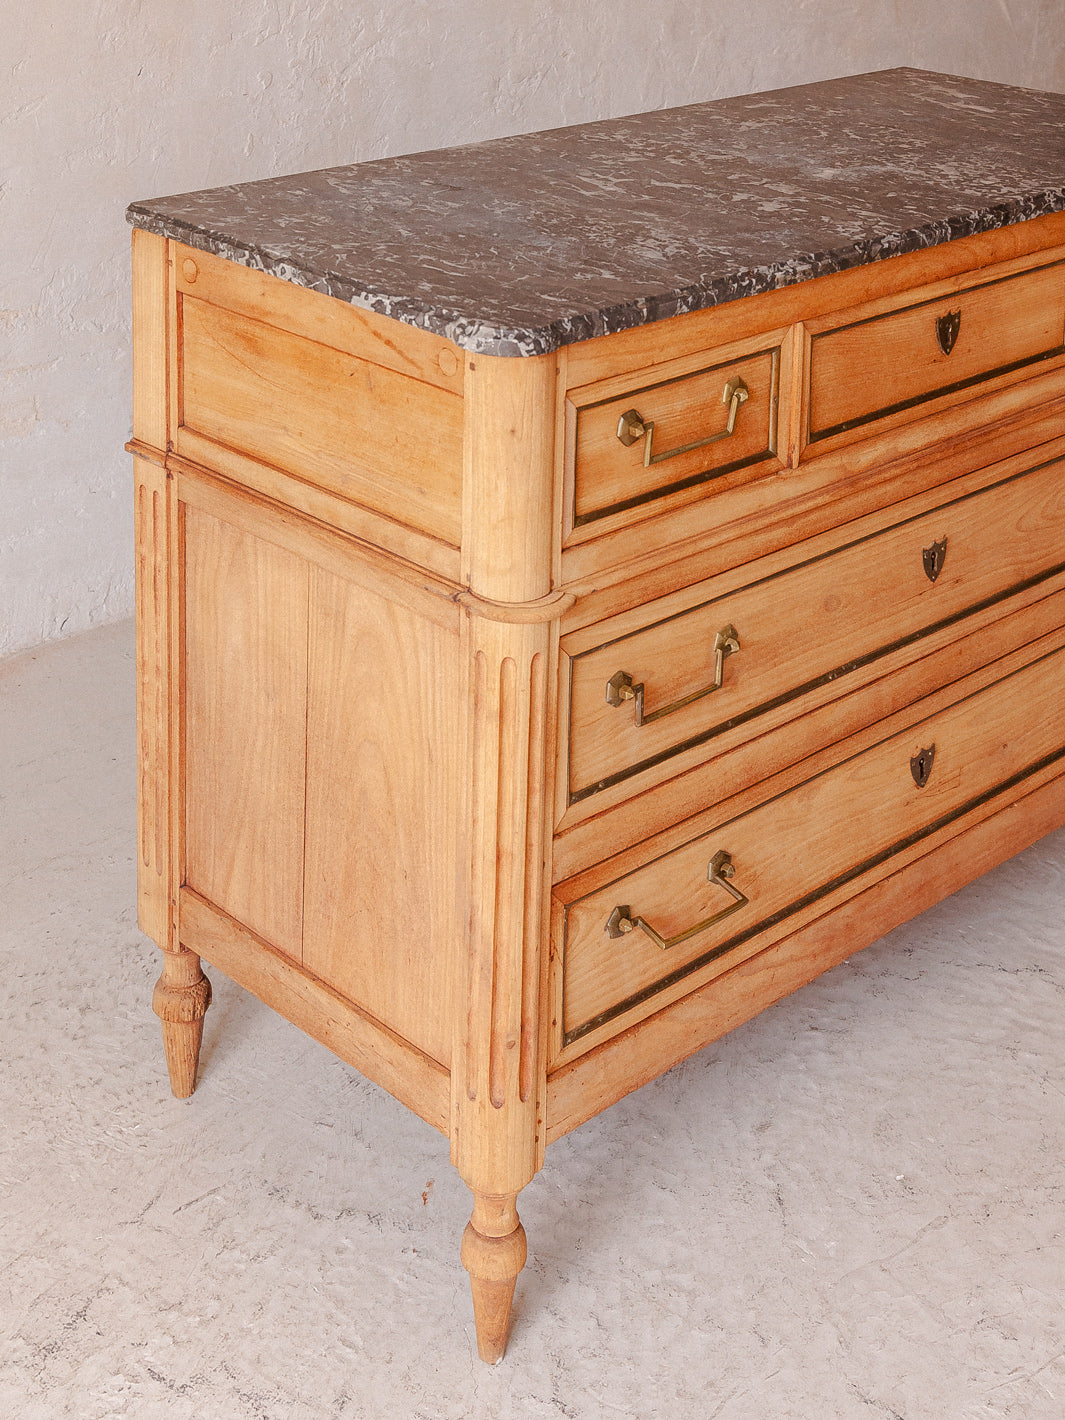 Chest of drawers Birch and marble XNUMXth century